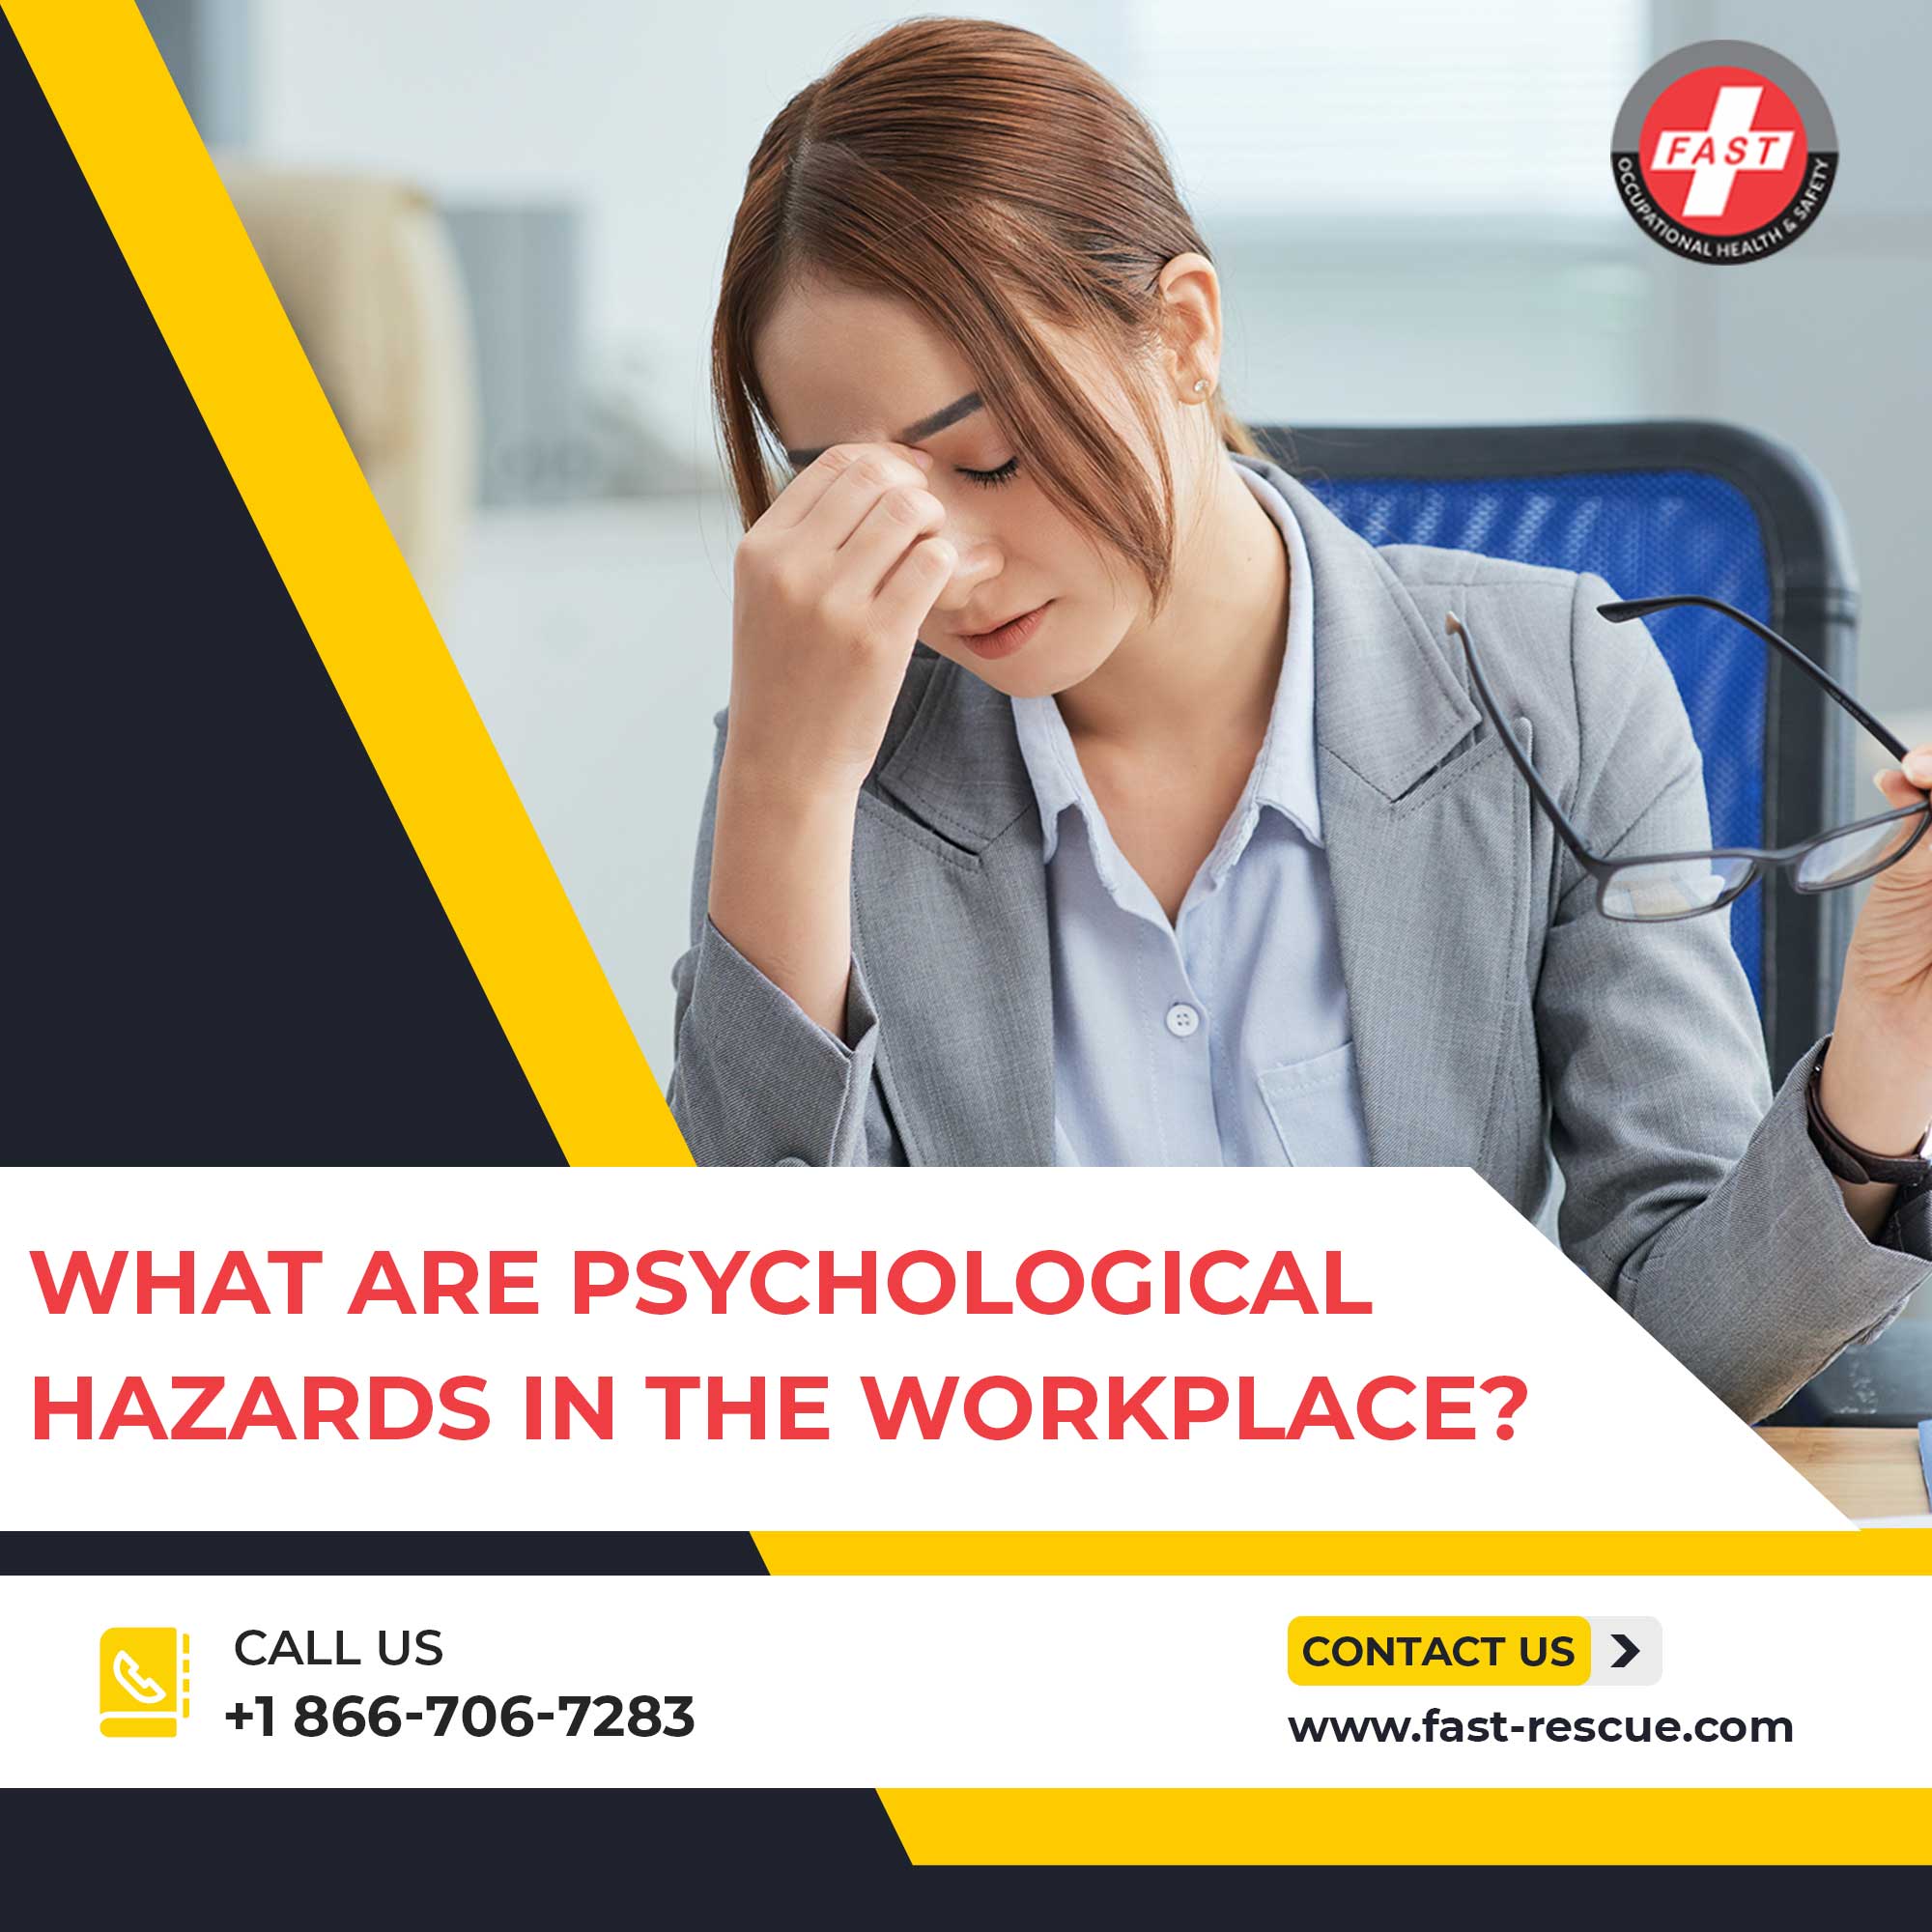 What Are Psychological Hazards In The Workplace